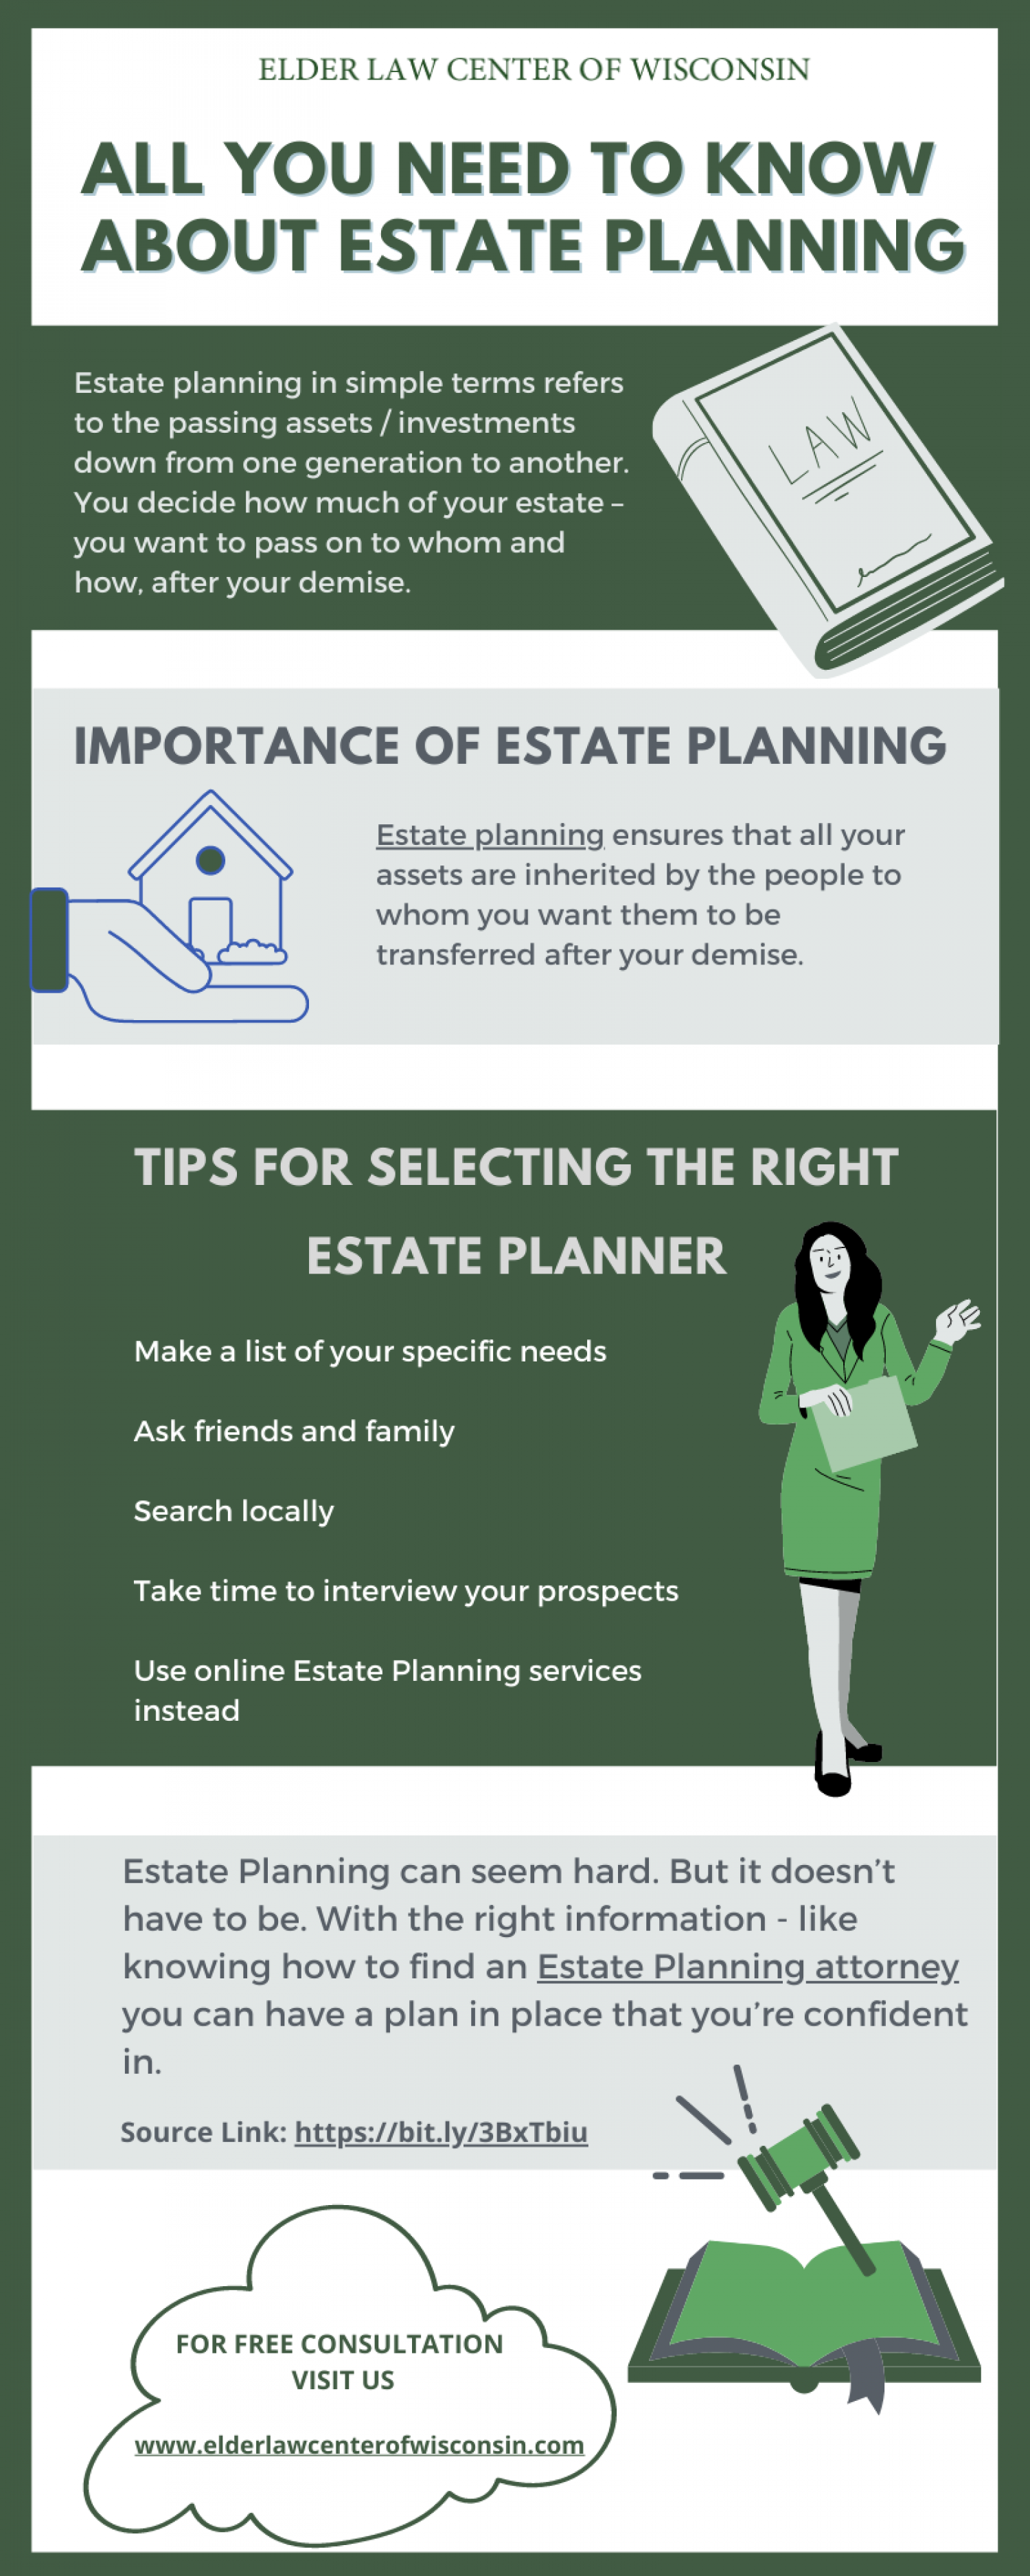 All You Need to Know About Estate Planning Infographic